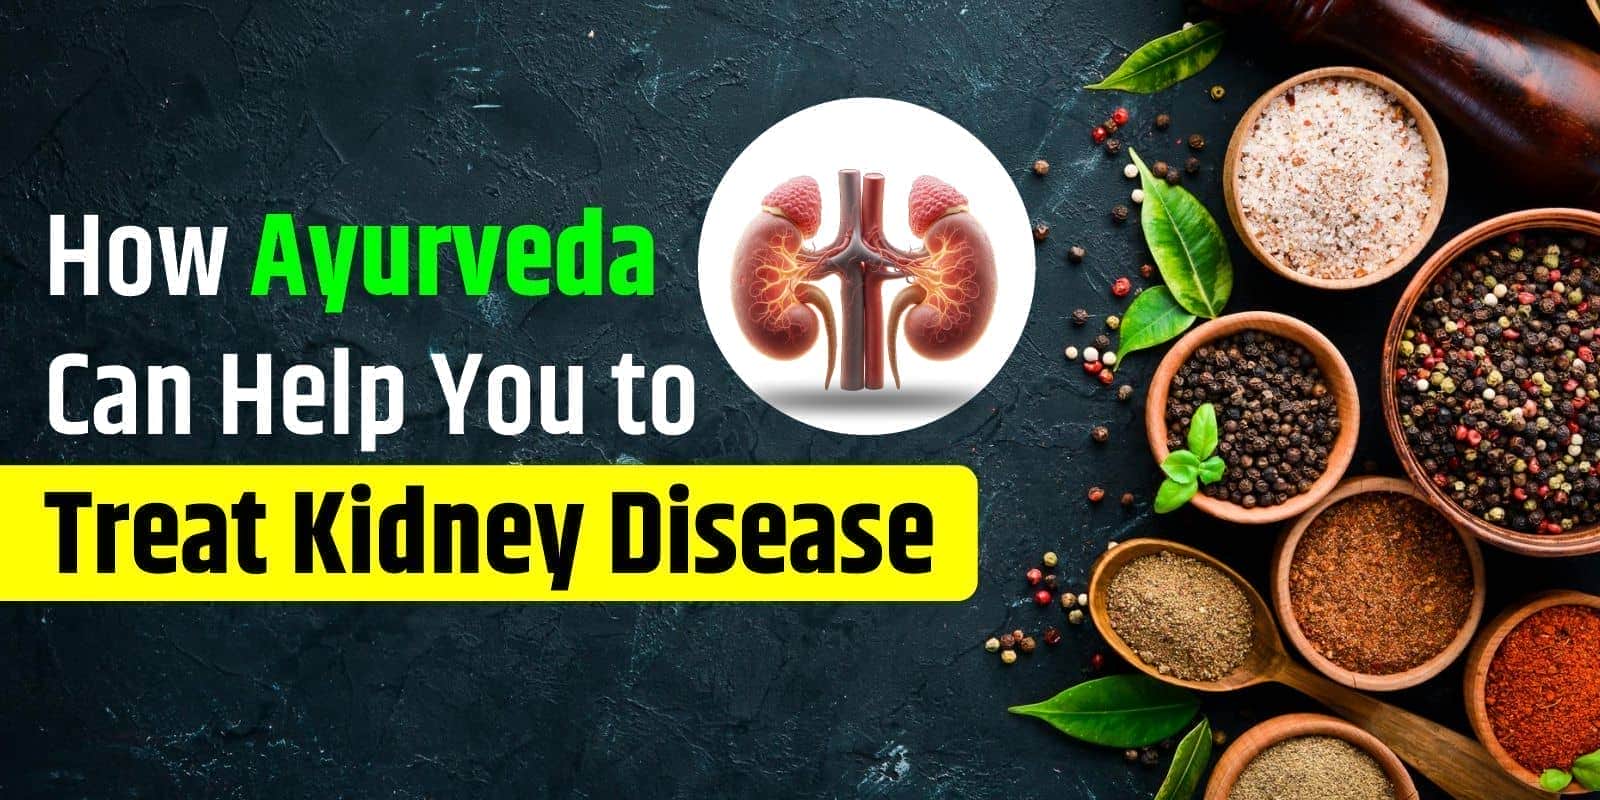 How Ayurveda Can Help You to Treat Kidney Disease